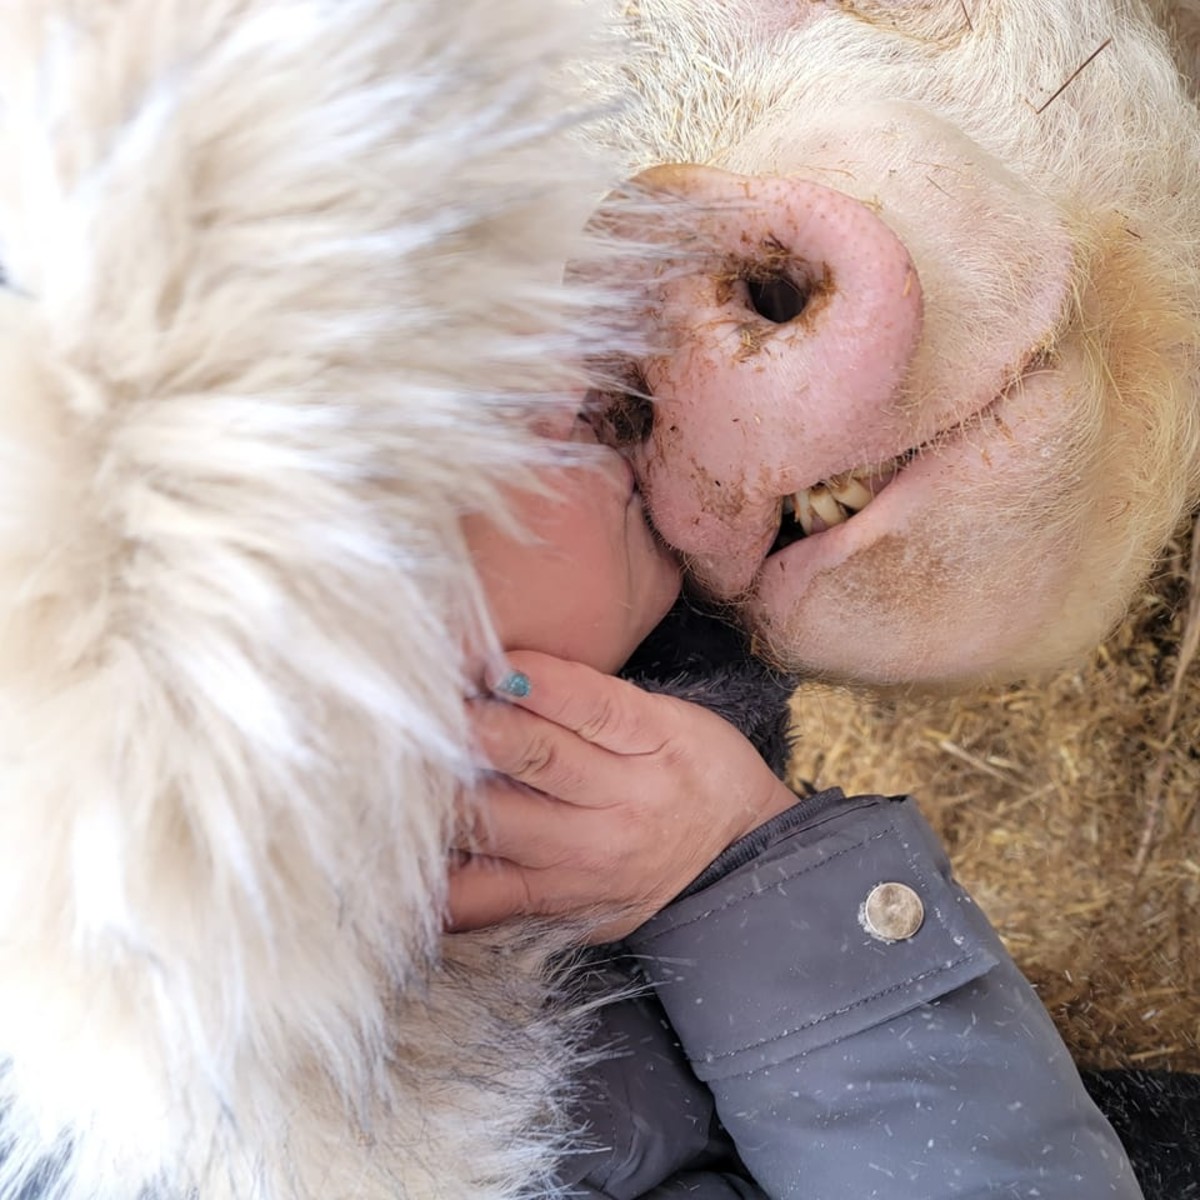 This is me with my friend Lucky, a pig at a local farm sanctuary near my home. She loves to give kisses and cuddles.